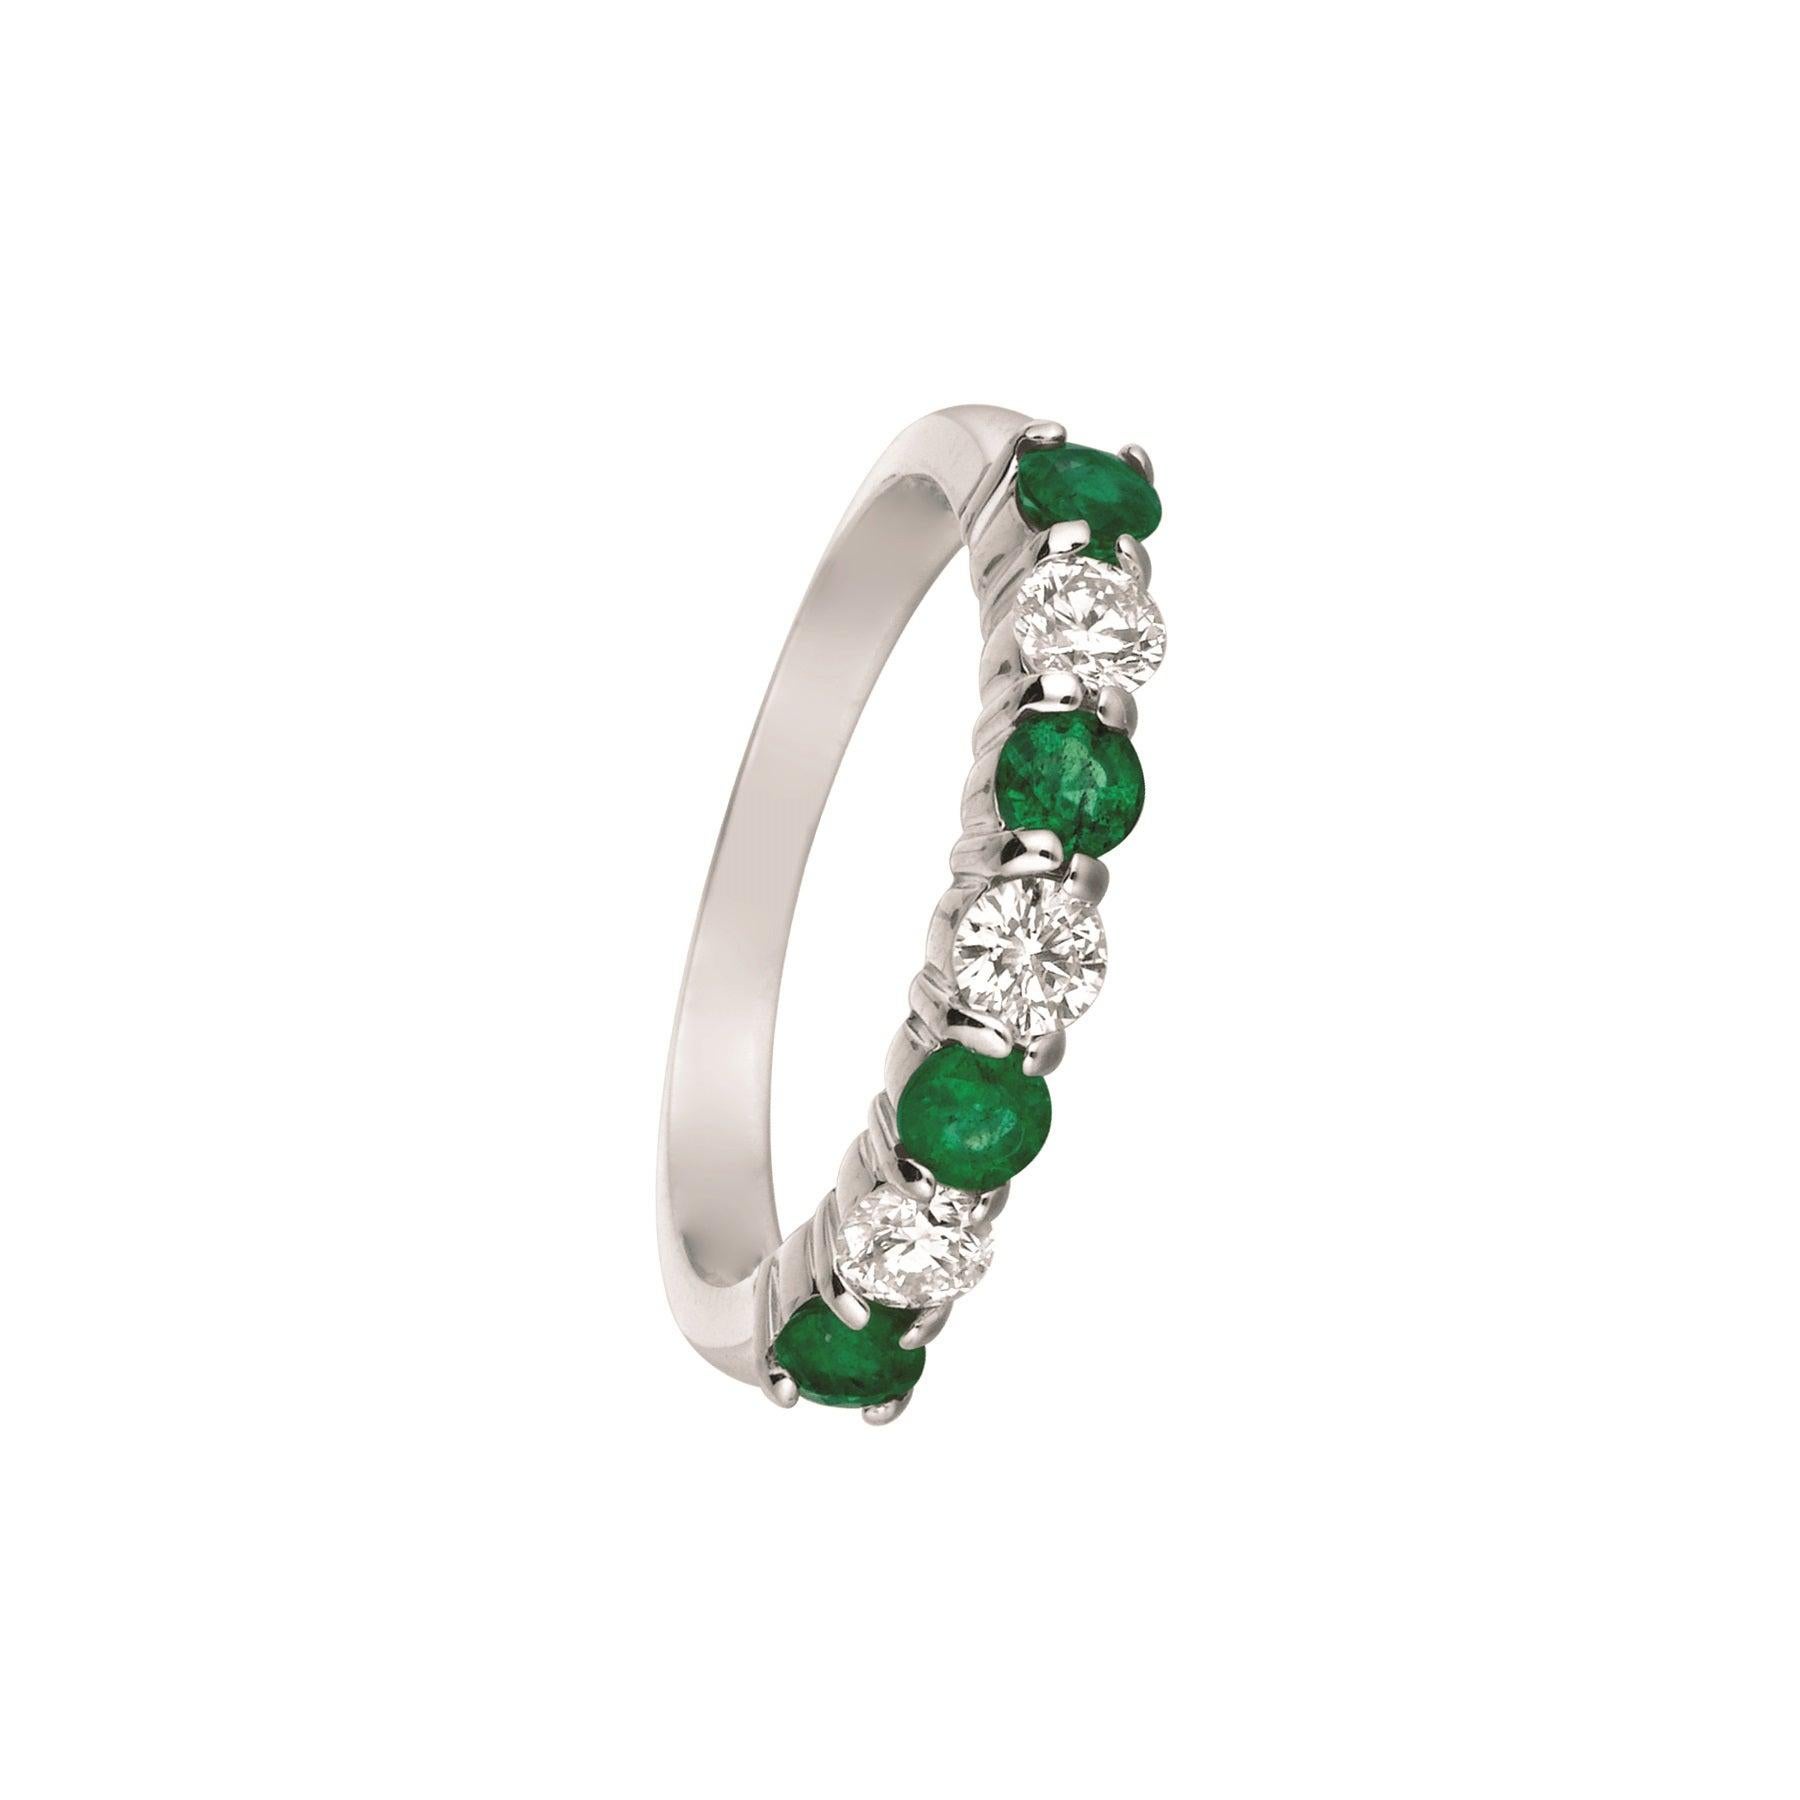 For Sale:  1.45 Carat Natural Diamond and Emerald 7-Stone Ring Band 14 Karat White Gold 4